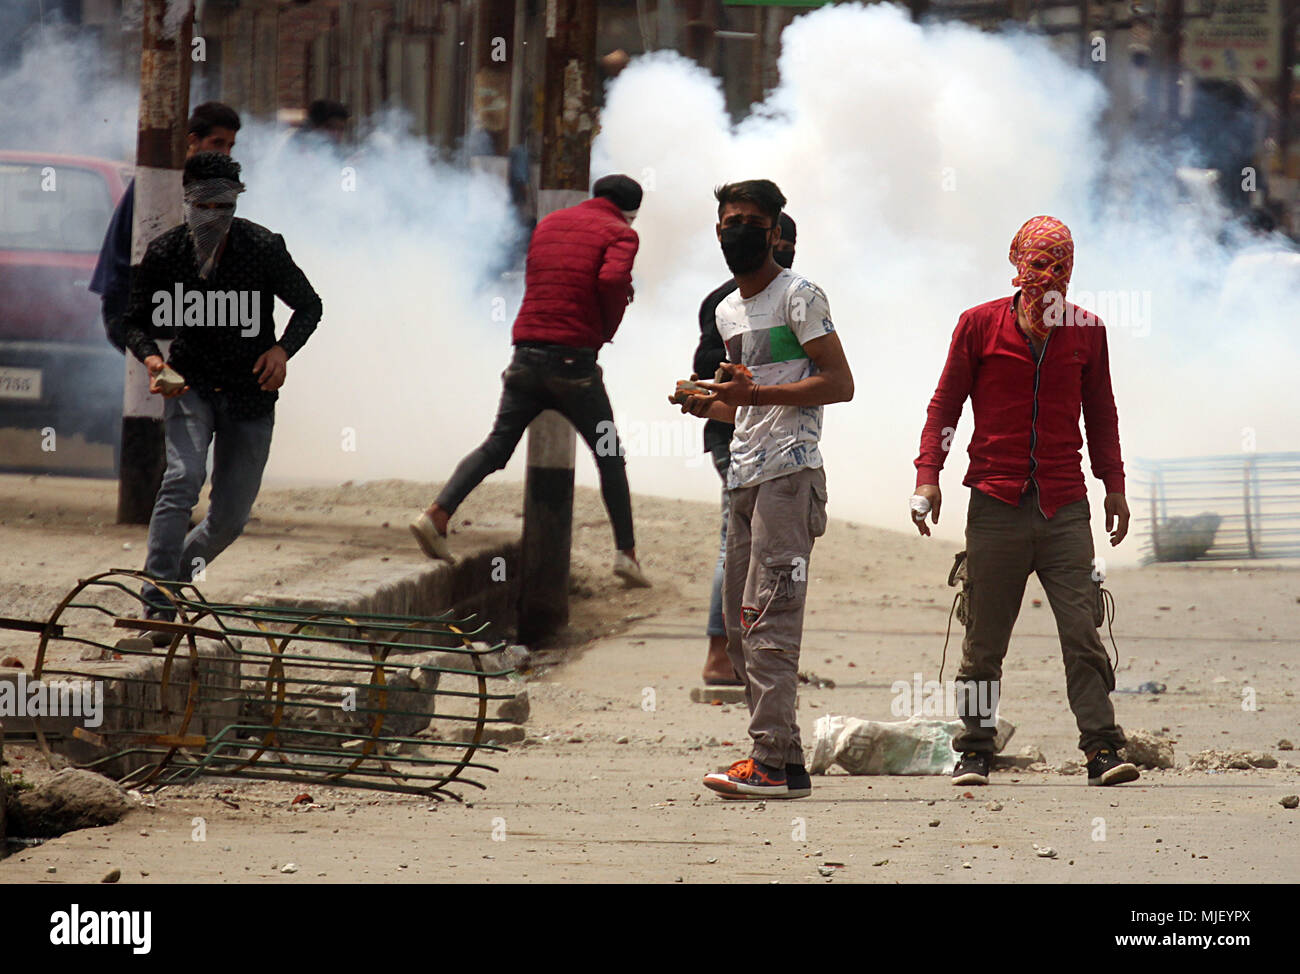 Srinagar, Jammu and Kashmir, India. 5th May, 2018. Protesters clash with Indian police in Srinagar the summer of Indian controlled Kashmir on May 05, 2018. Four people including a protester and three rebels were killed during a gun-battle between rebels and Indian forces in Chattabal area of Srinagar. Massive clashes erupt across Srinagar after the news about the trapping of rebels and killing of protester spread across the city. Police fired teargas canisters, pellets, stun grenades and rubber coated bullets to disperse the angry crowd. Credit: Faisal Khan/ZUMA Wire/Alamy Live News Stock Photo